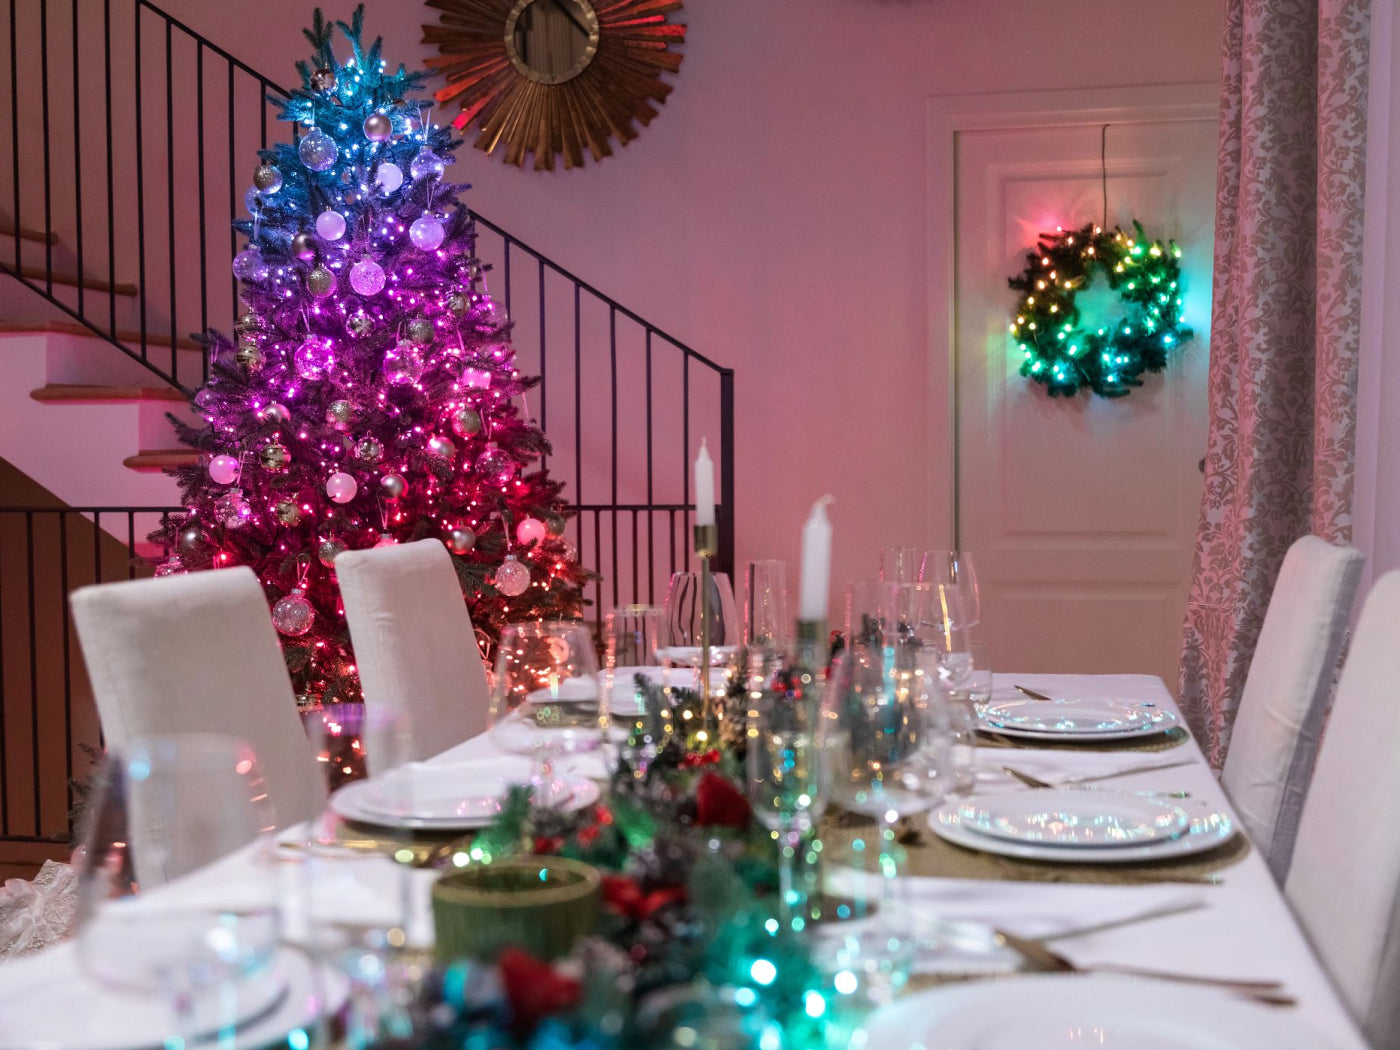 5 reasons why Twinkly offers the best decorative Christmas lights